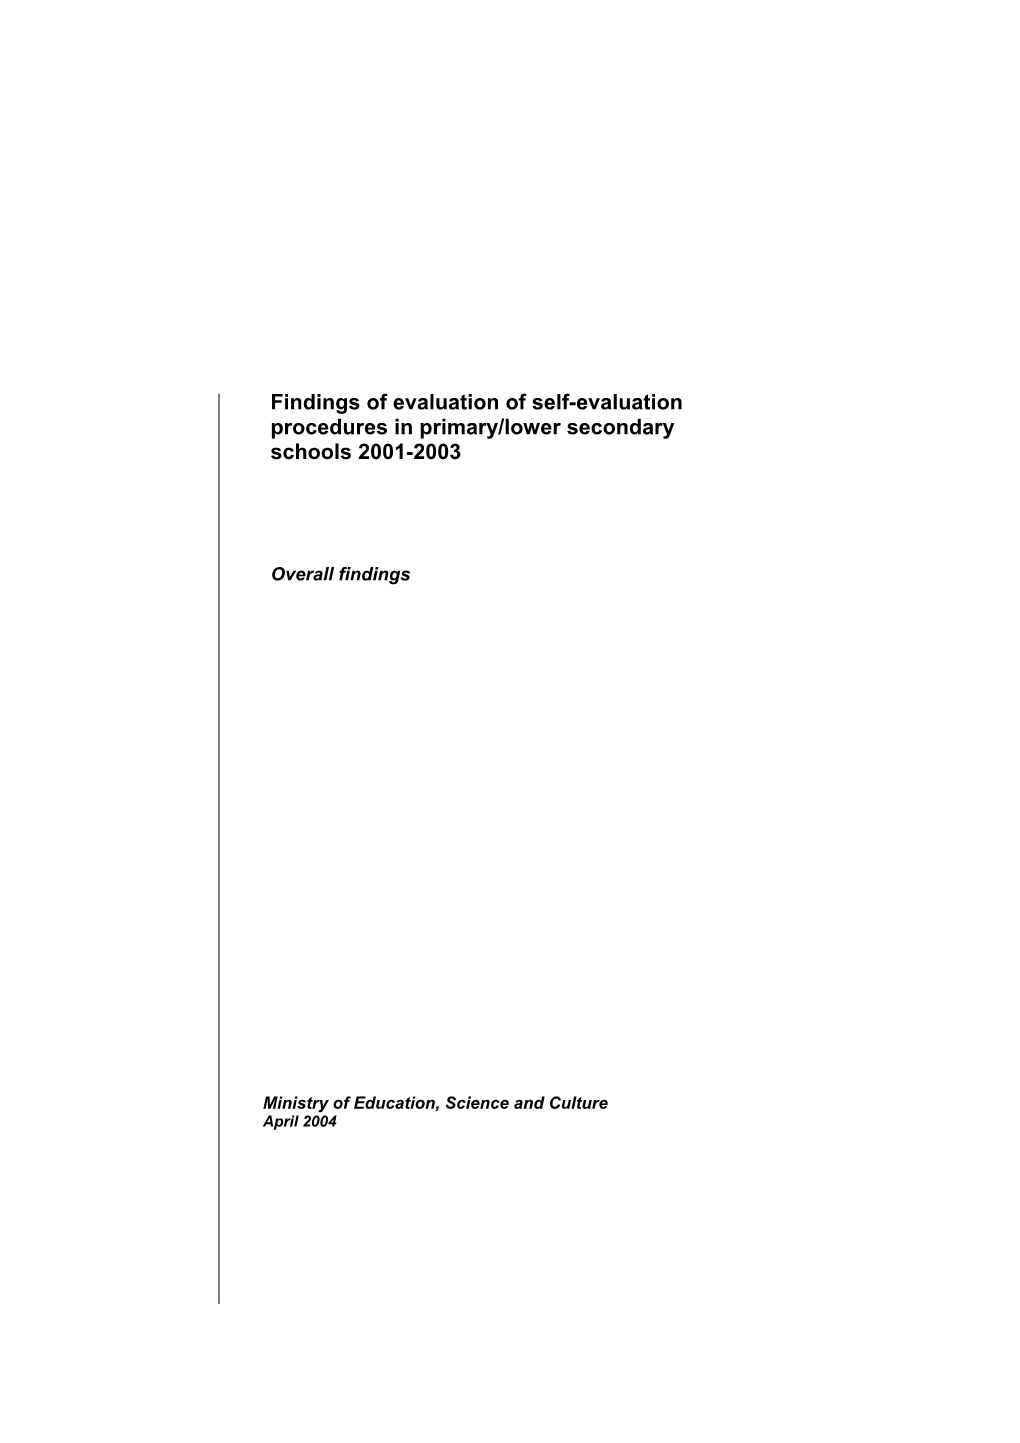 Findings of Evaluation of Self-Evaluation Procedures in Primary/Lower Secondary Schools 2001-2003